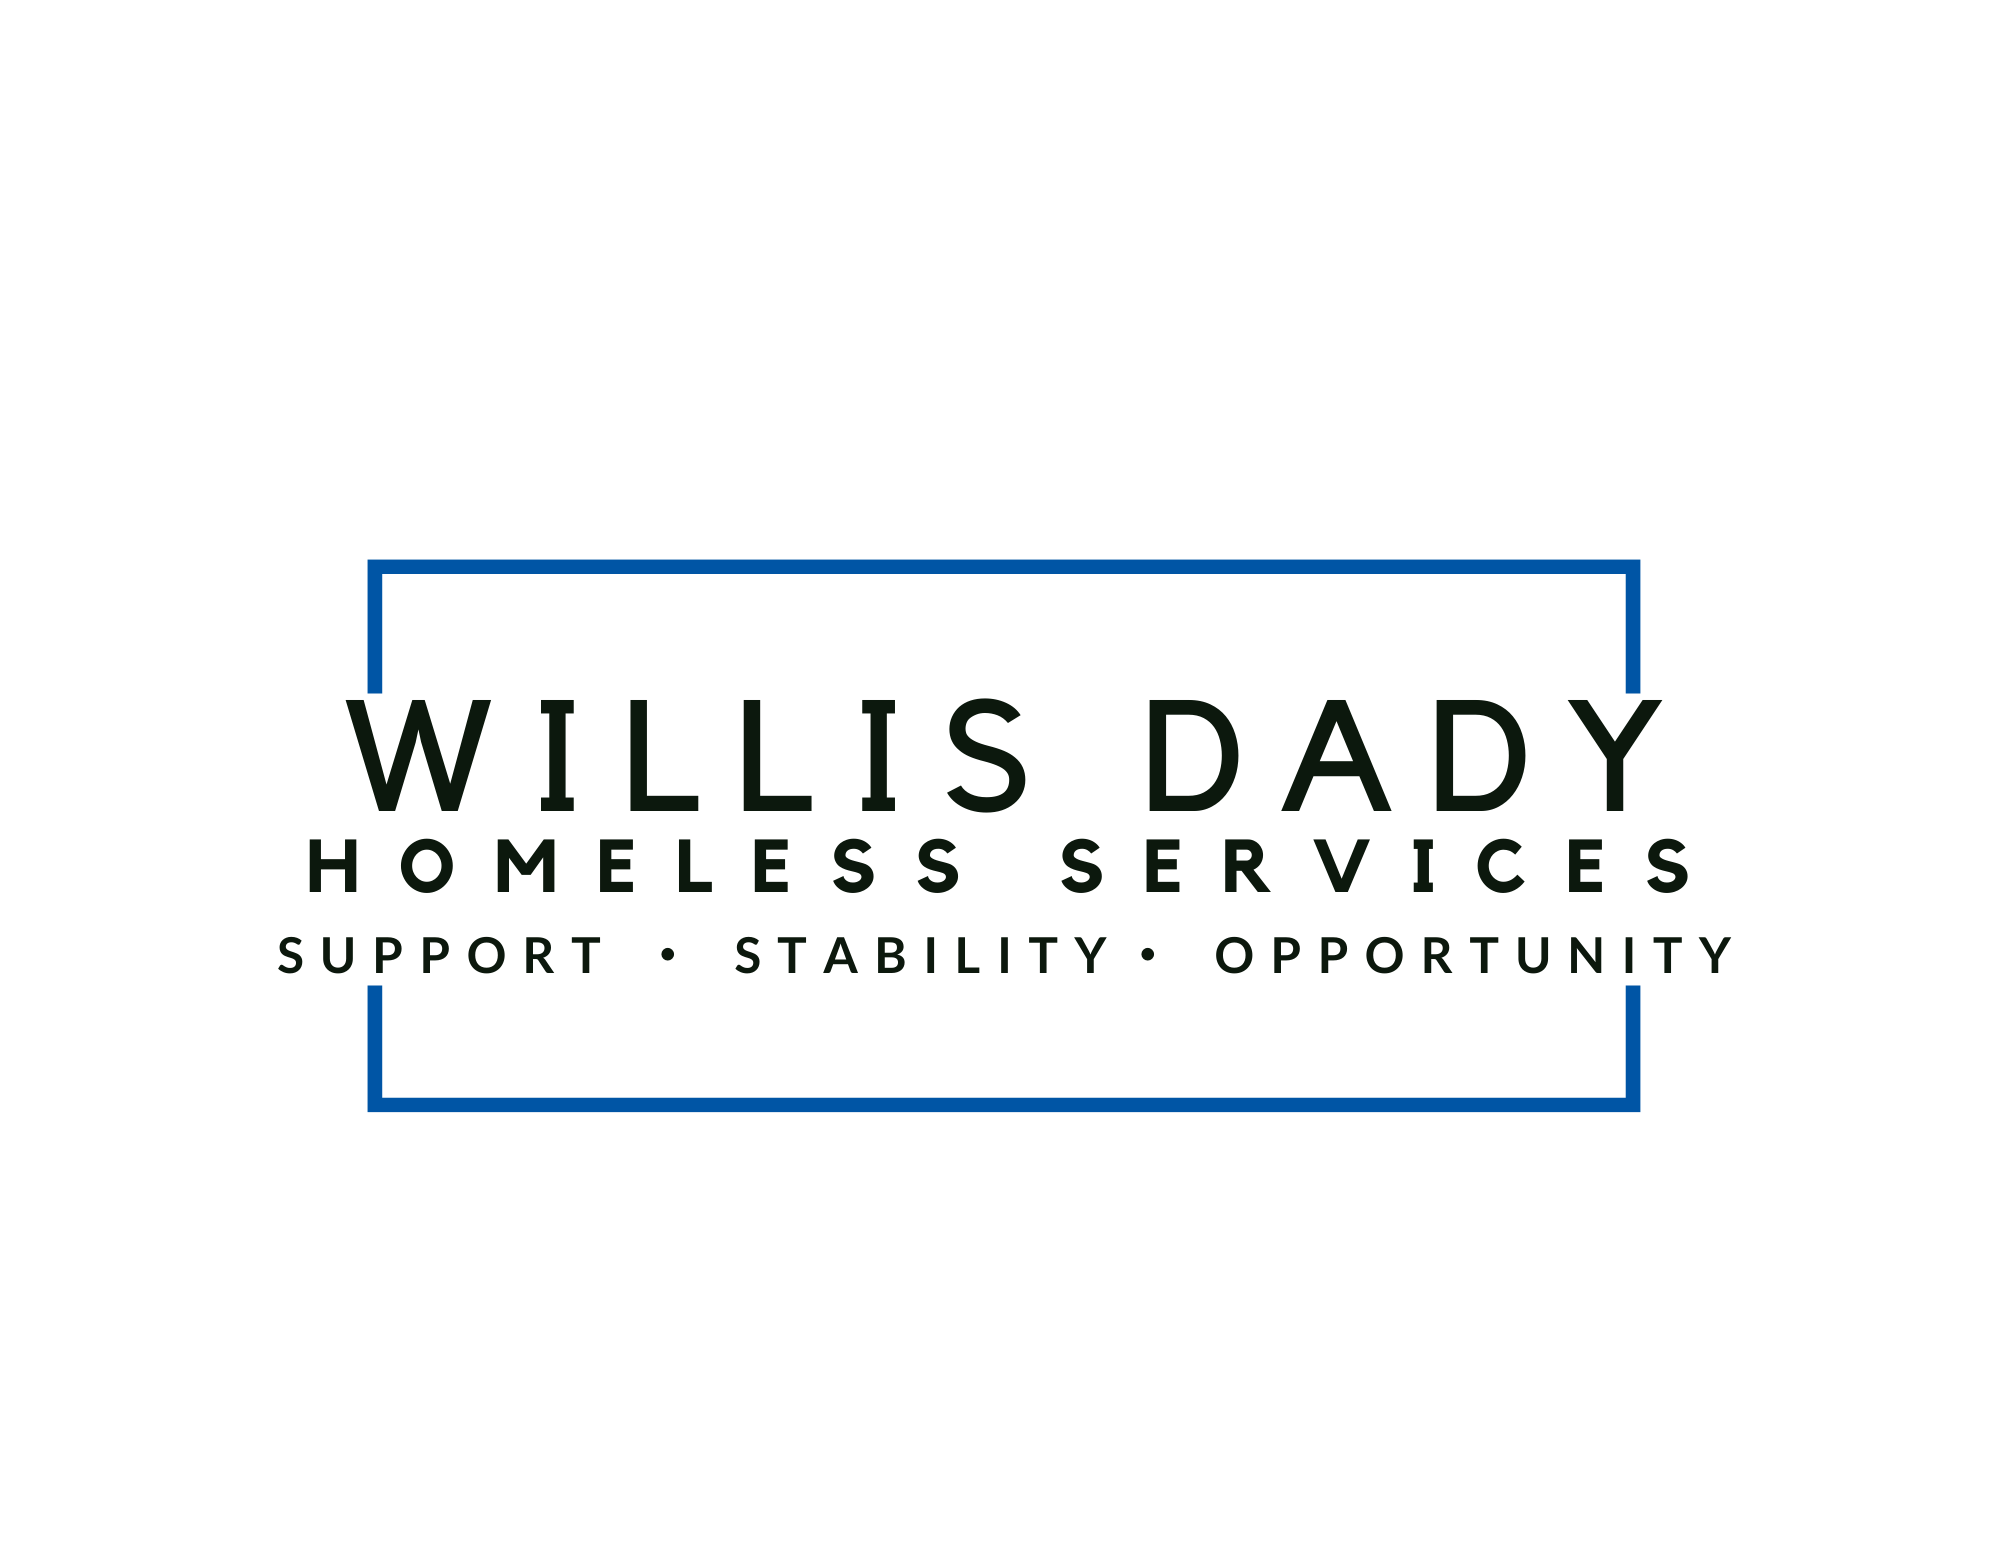 Willis Dady Homeless Services